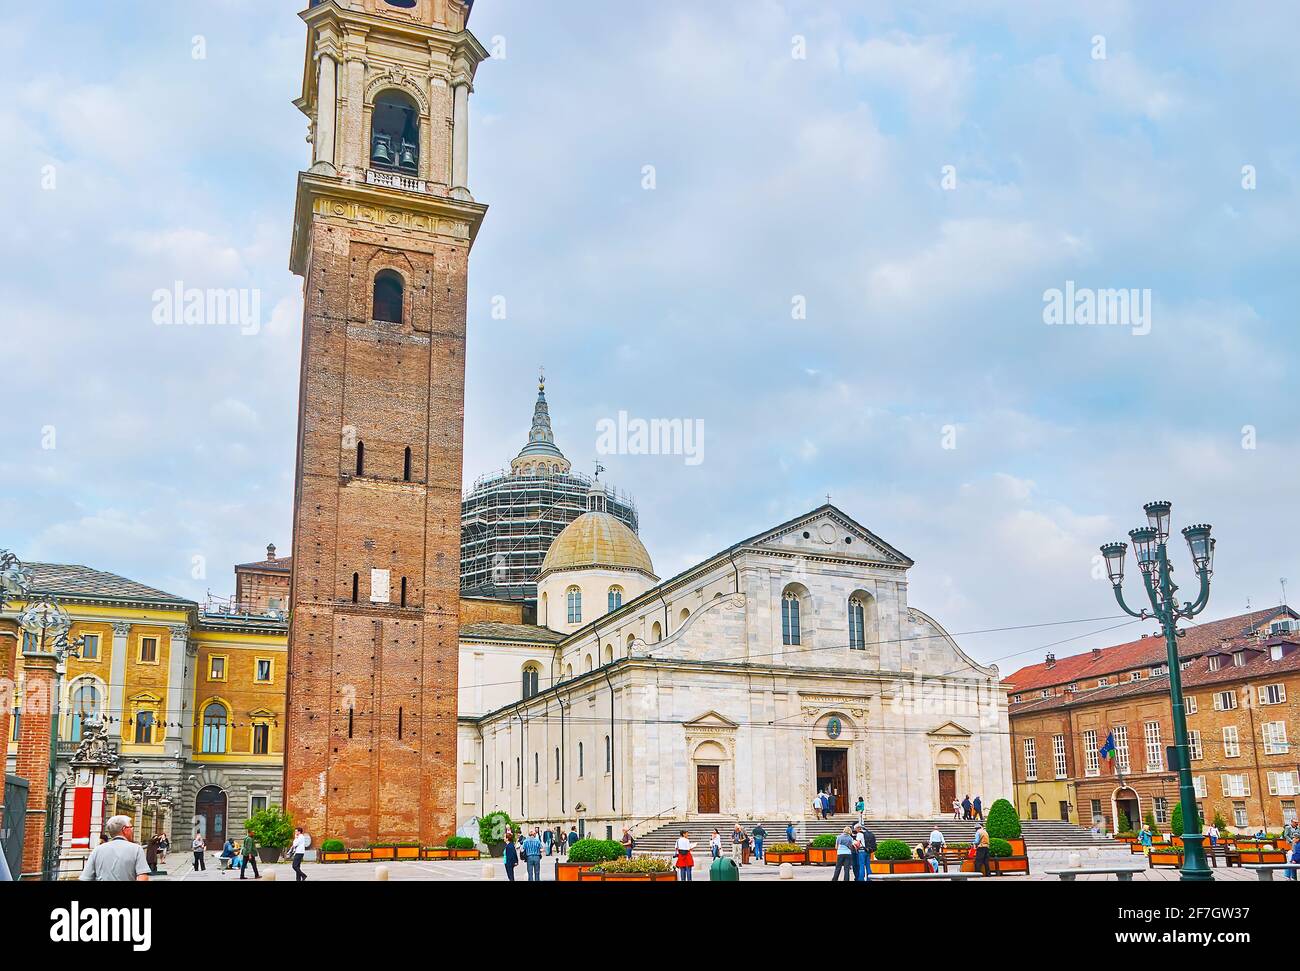 TURIN, ITALY - May 9, 2012: The facade of the St John the Baptist Cathedral (Duomo di Torino) with tall brick bell tower (Campanile), located in Piazz Stock Photo